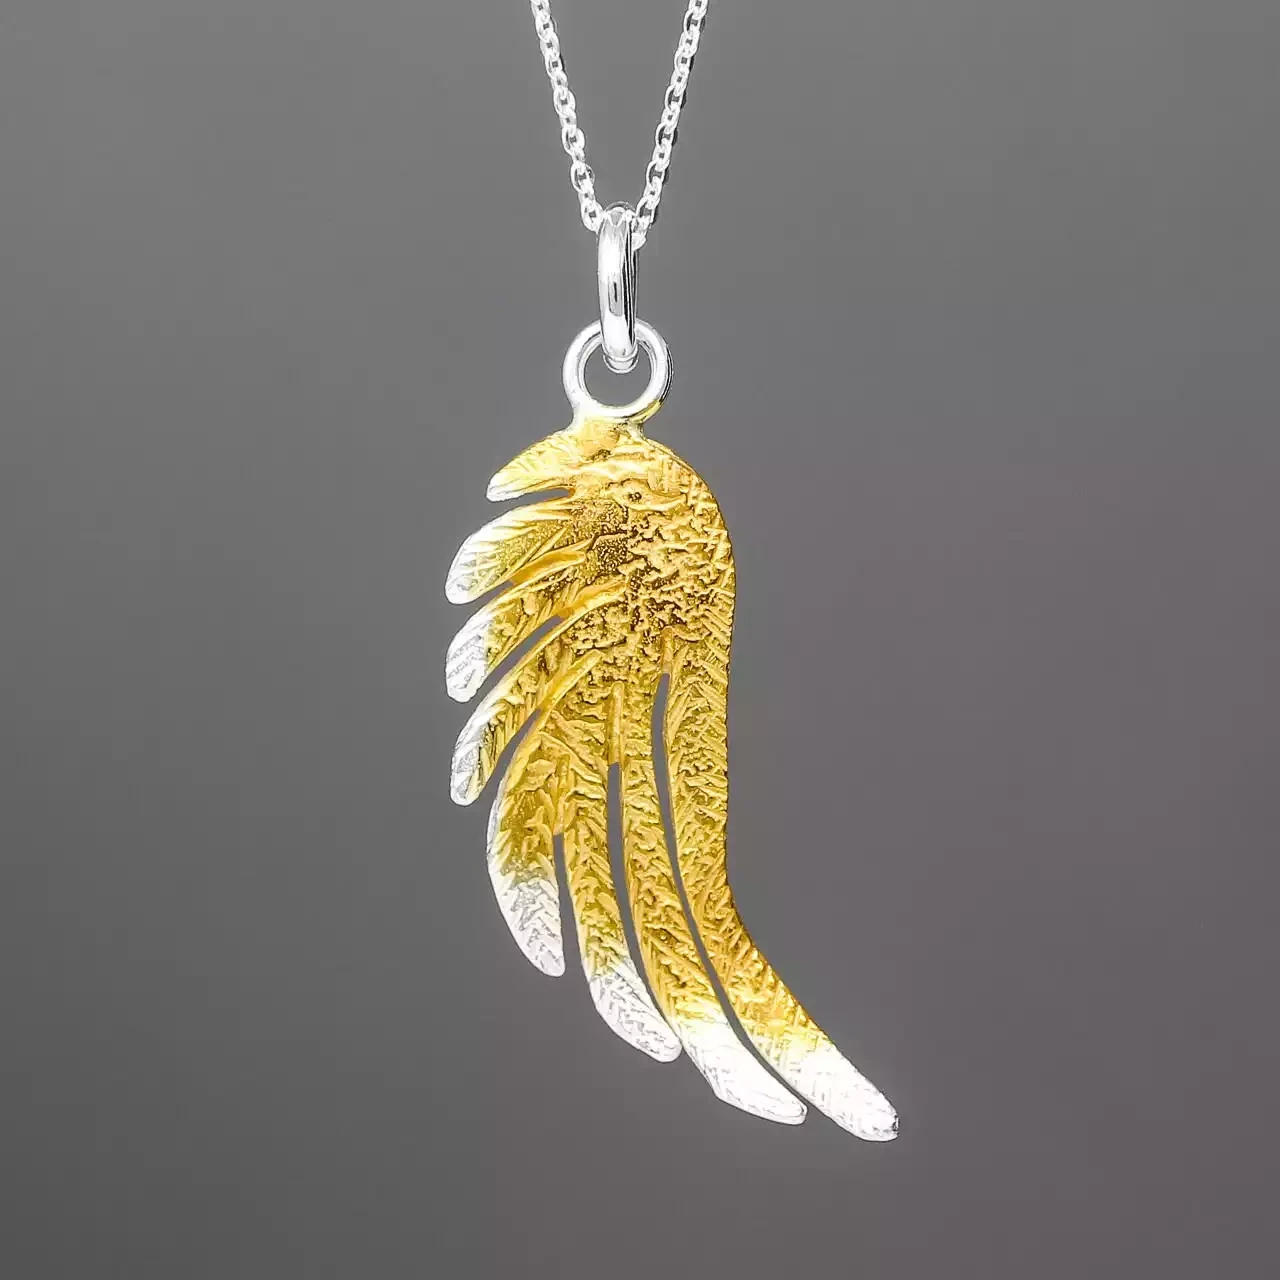 Angel Wing Silver and Gold Plate Charm Necklace - Large by Fi Mehra